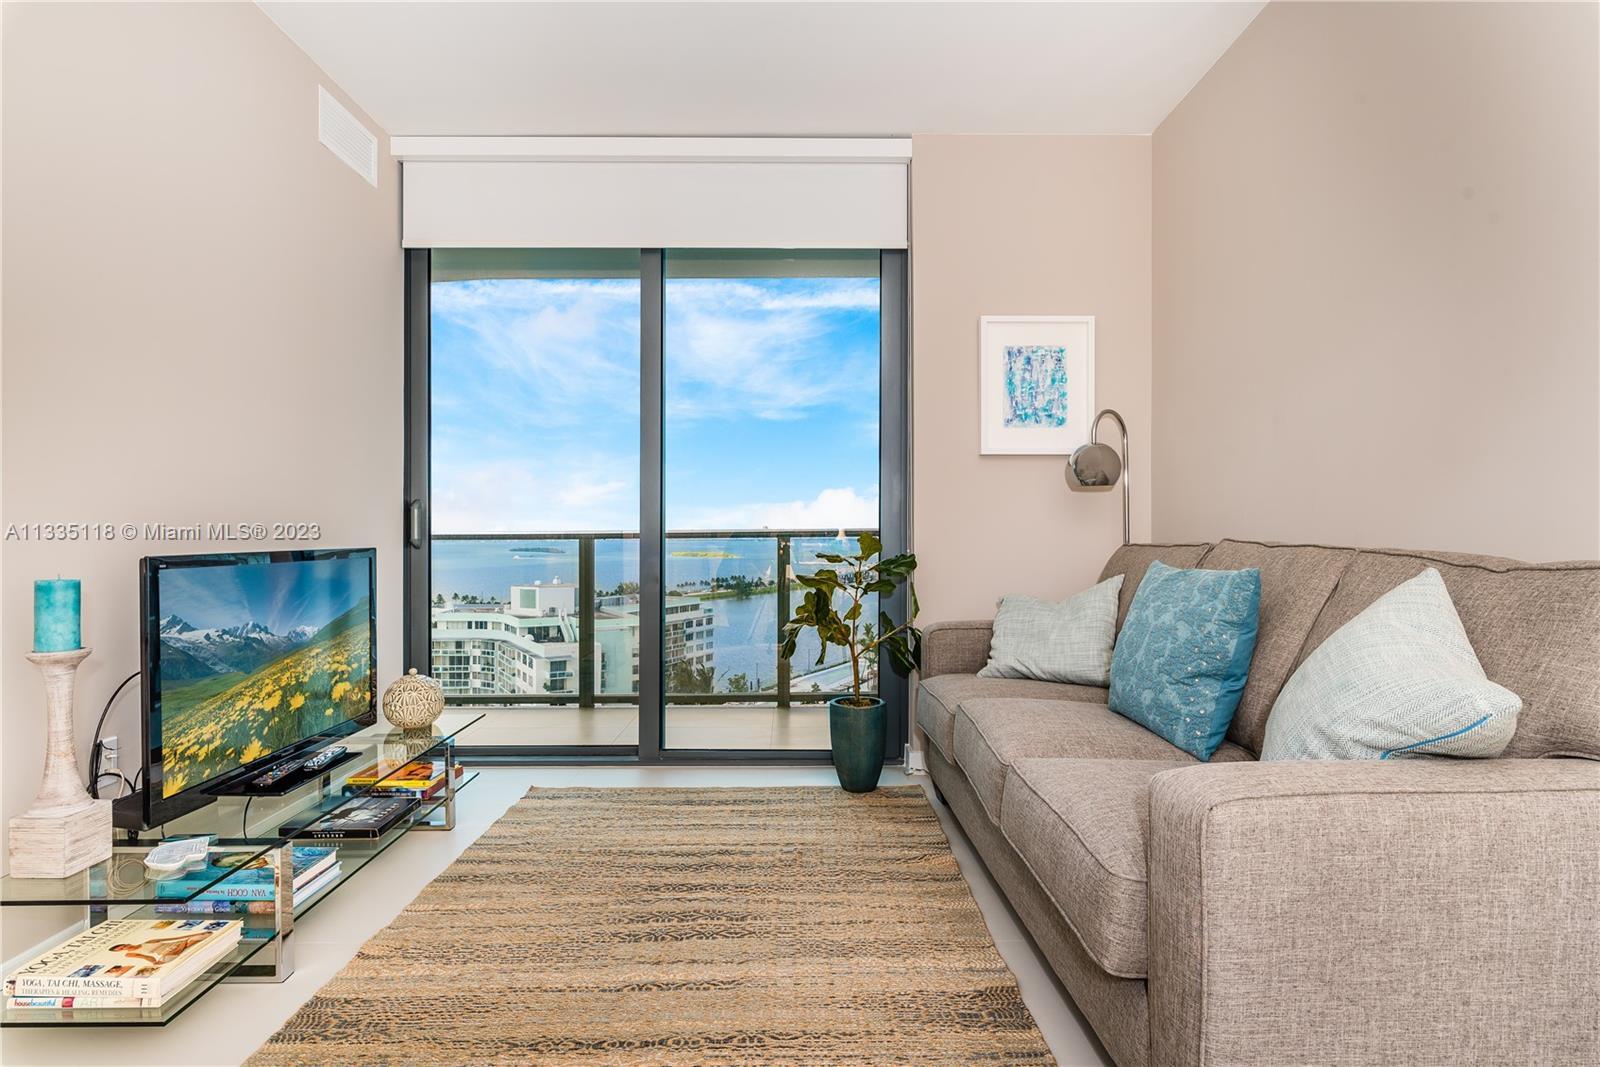 This fantastic 1 bed, 1.5 bath condo in the Paraiso Complex/Edgewater offers stunning views of the i